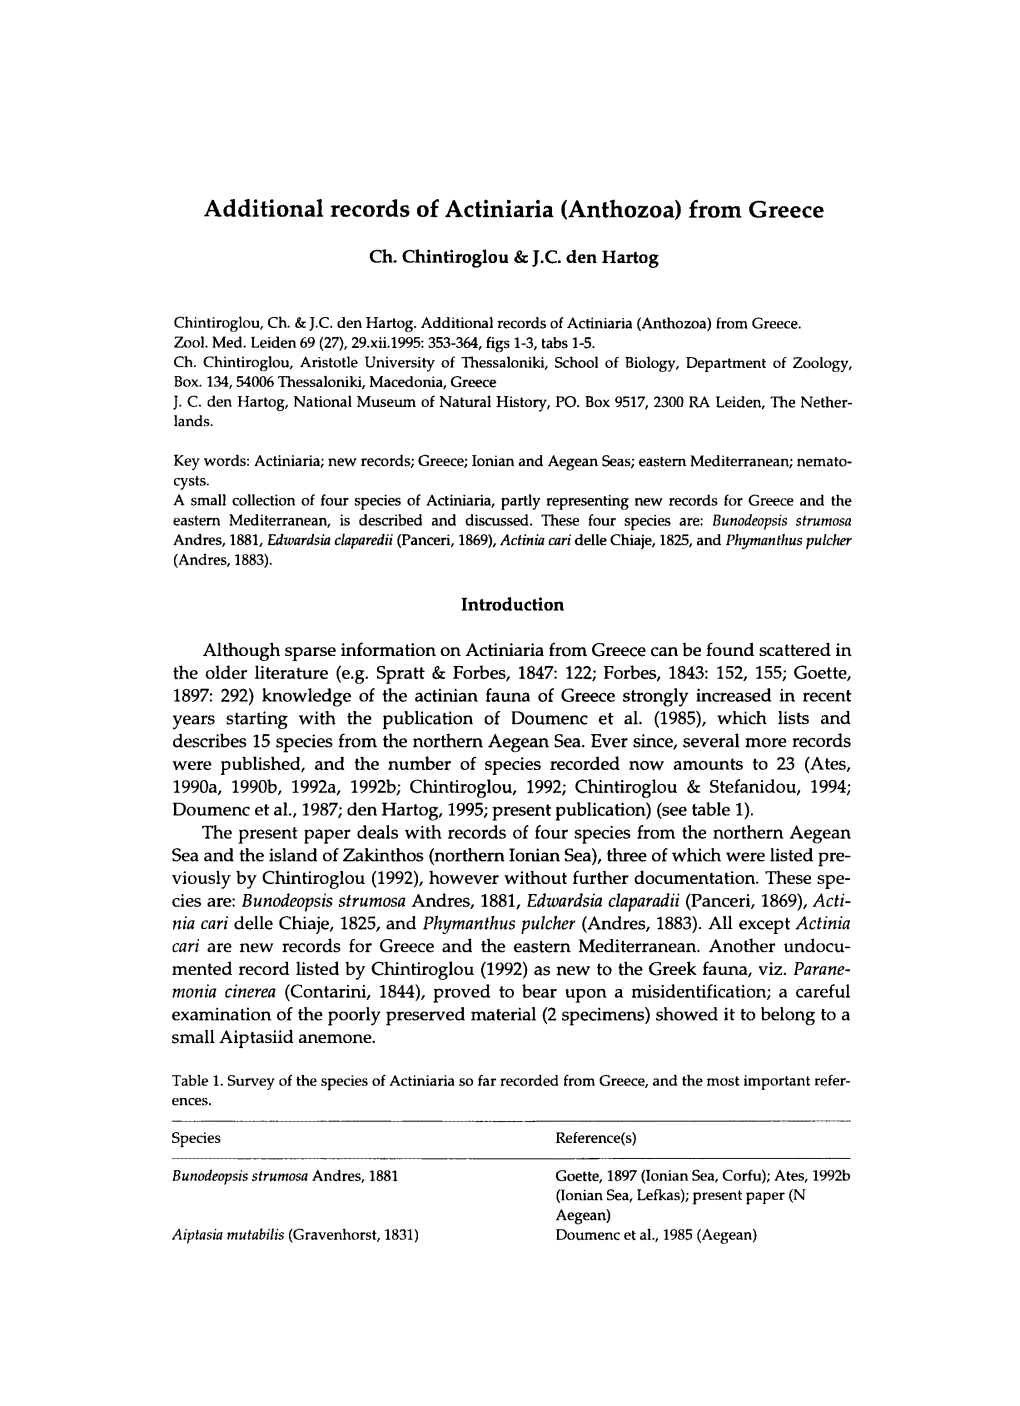 Additional Records of Actiniaria (Anthozoa) from Greece